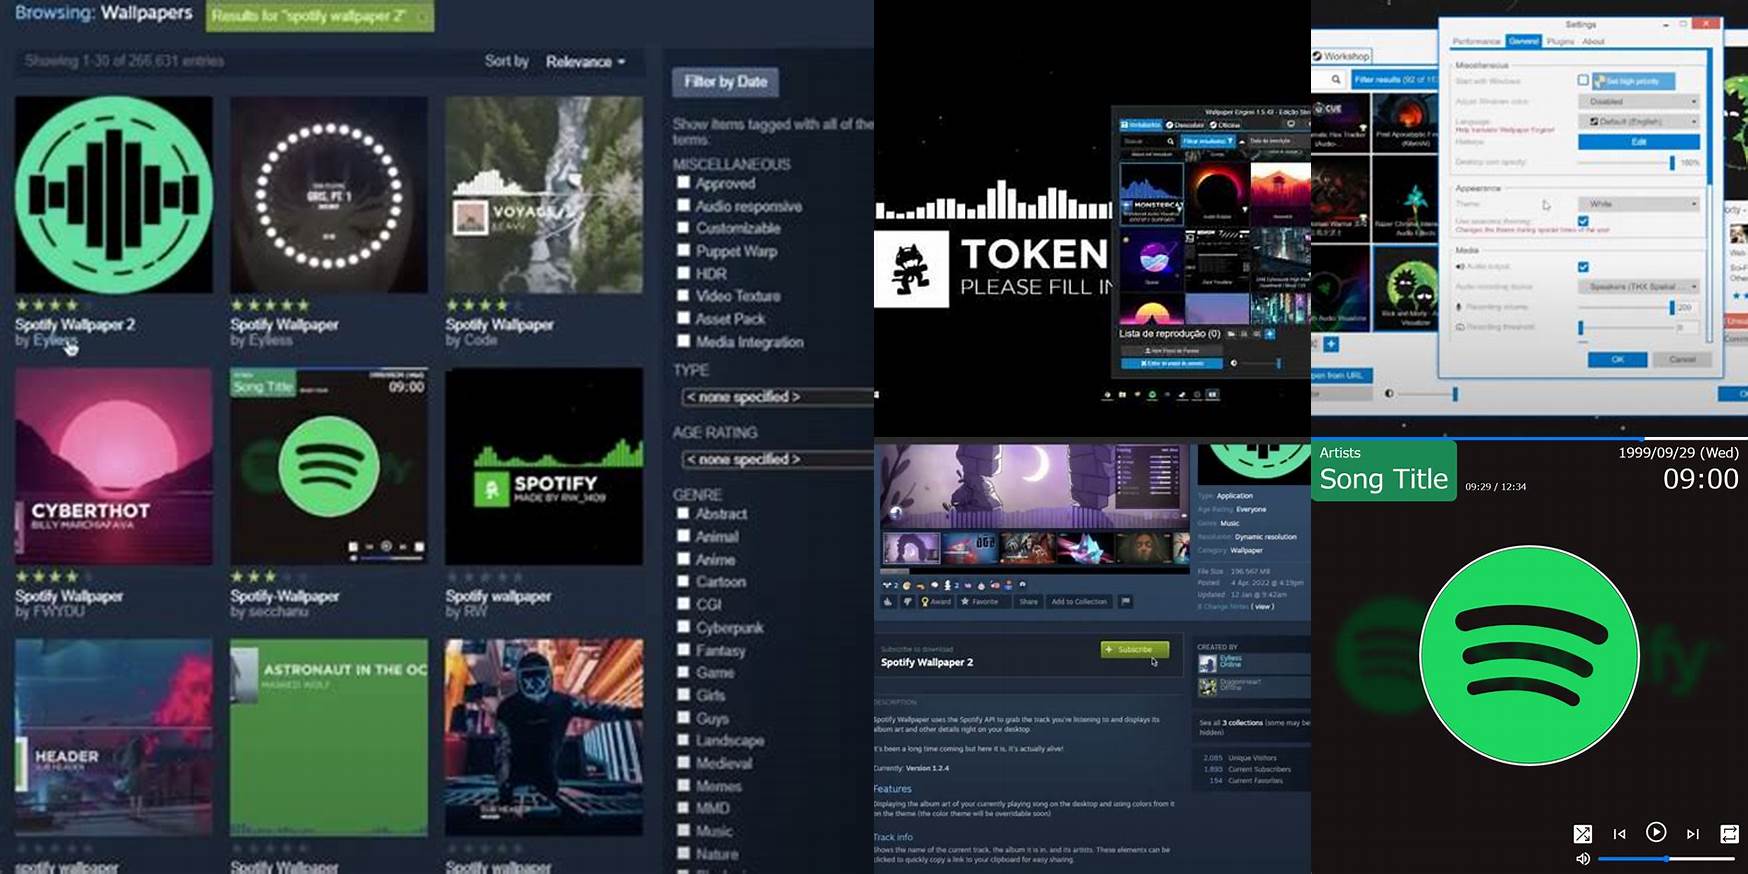 How To Get Spotify Token For Wallpaper Engine